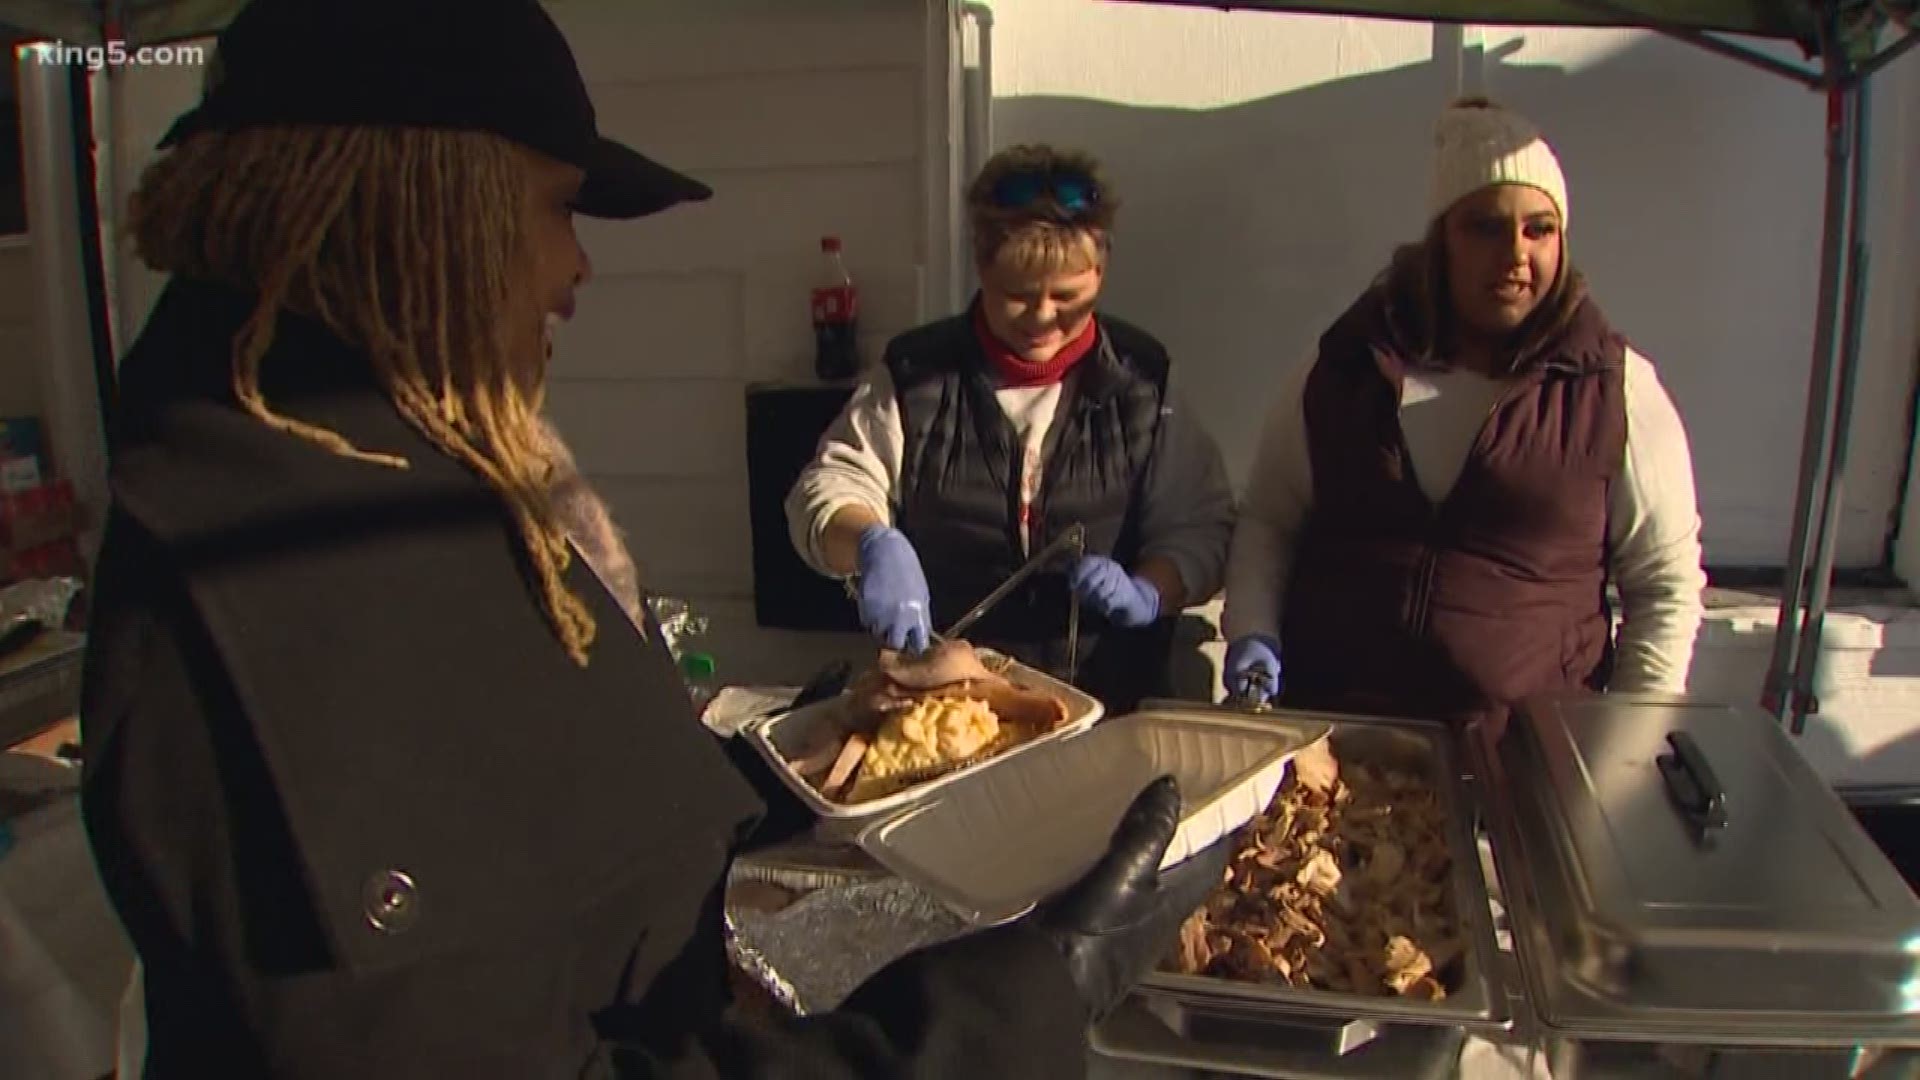 An army of volunteers went out to People's Park in Tacoma on Thanksgiving. They fed dozens of homeless people who are facing a looming tent ban.